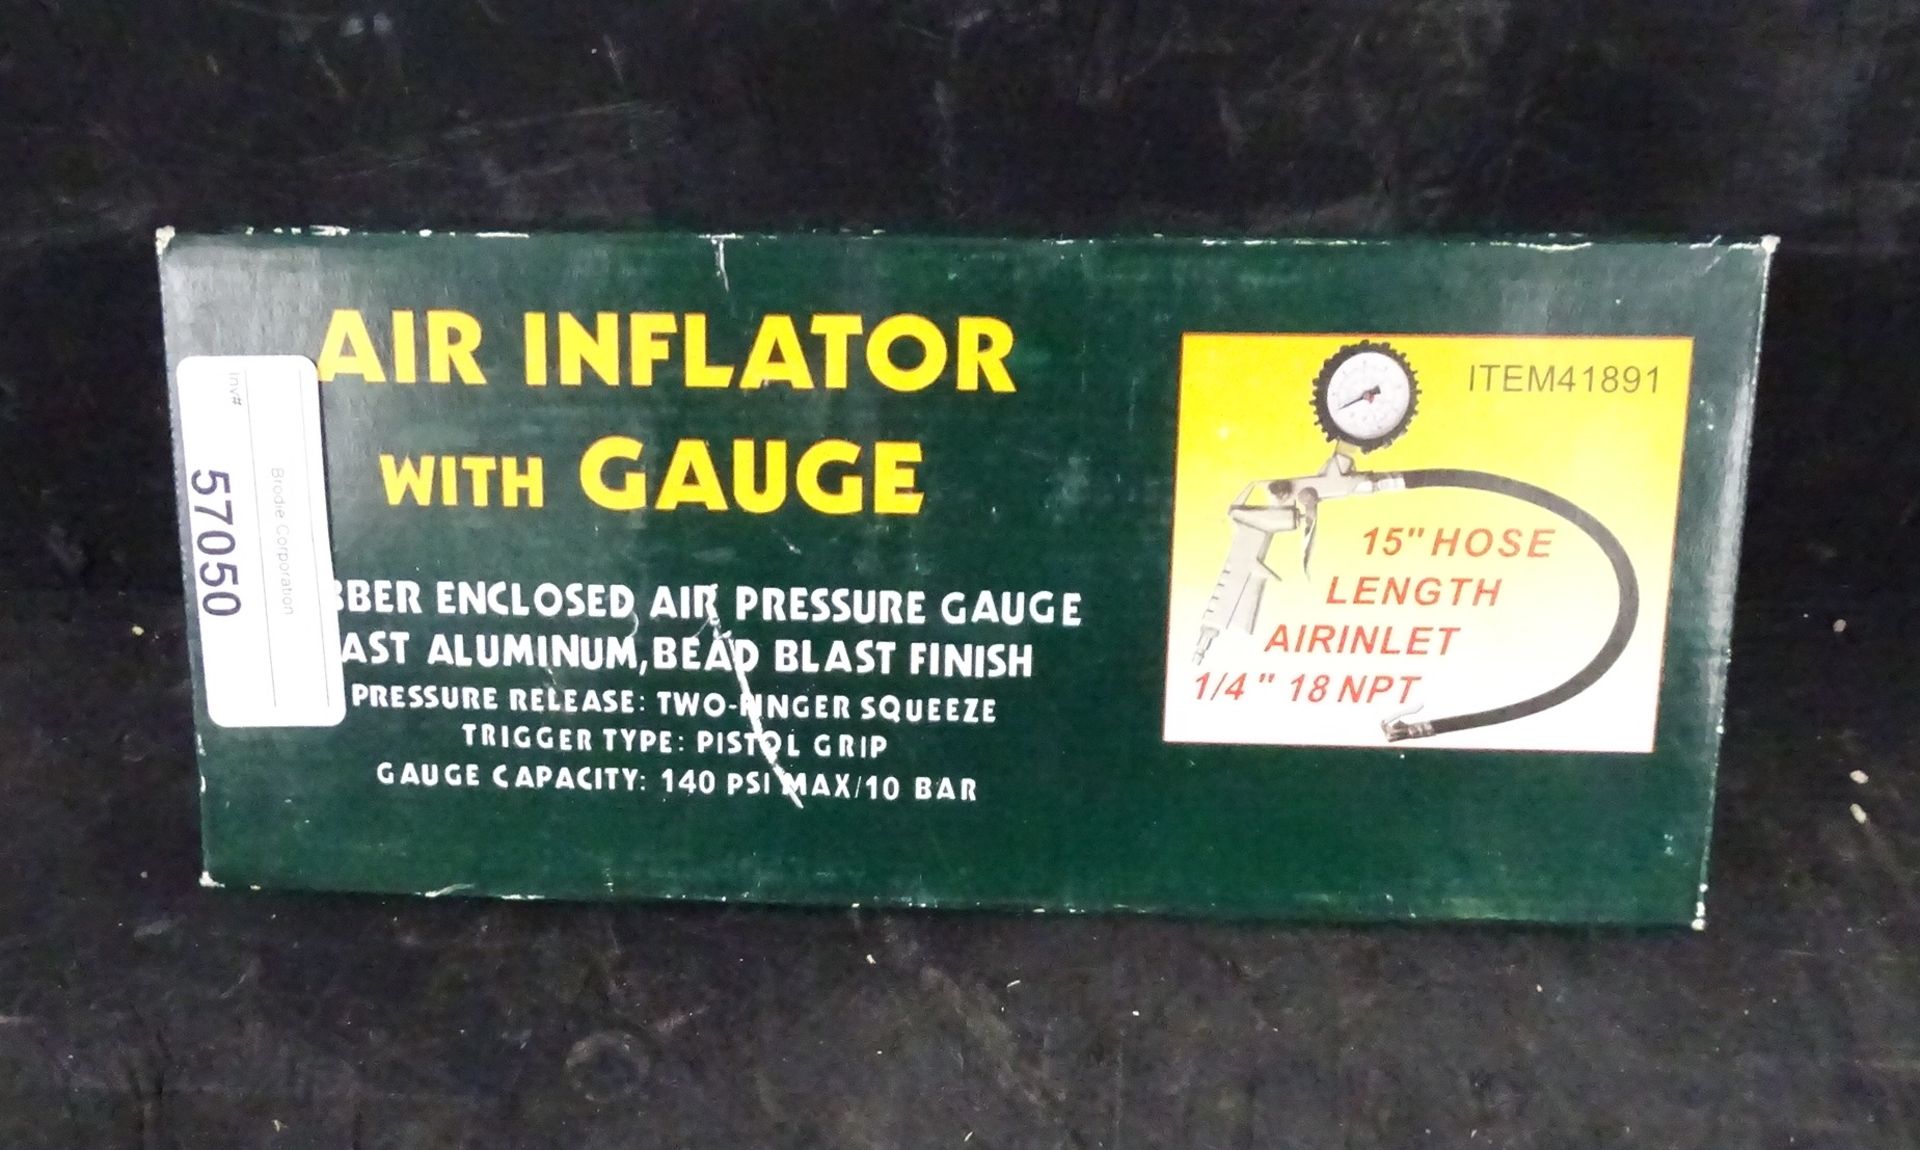 Air Inflator with Gage